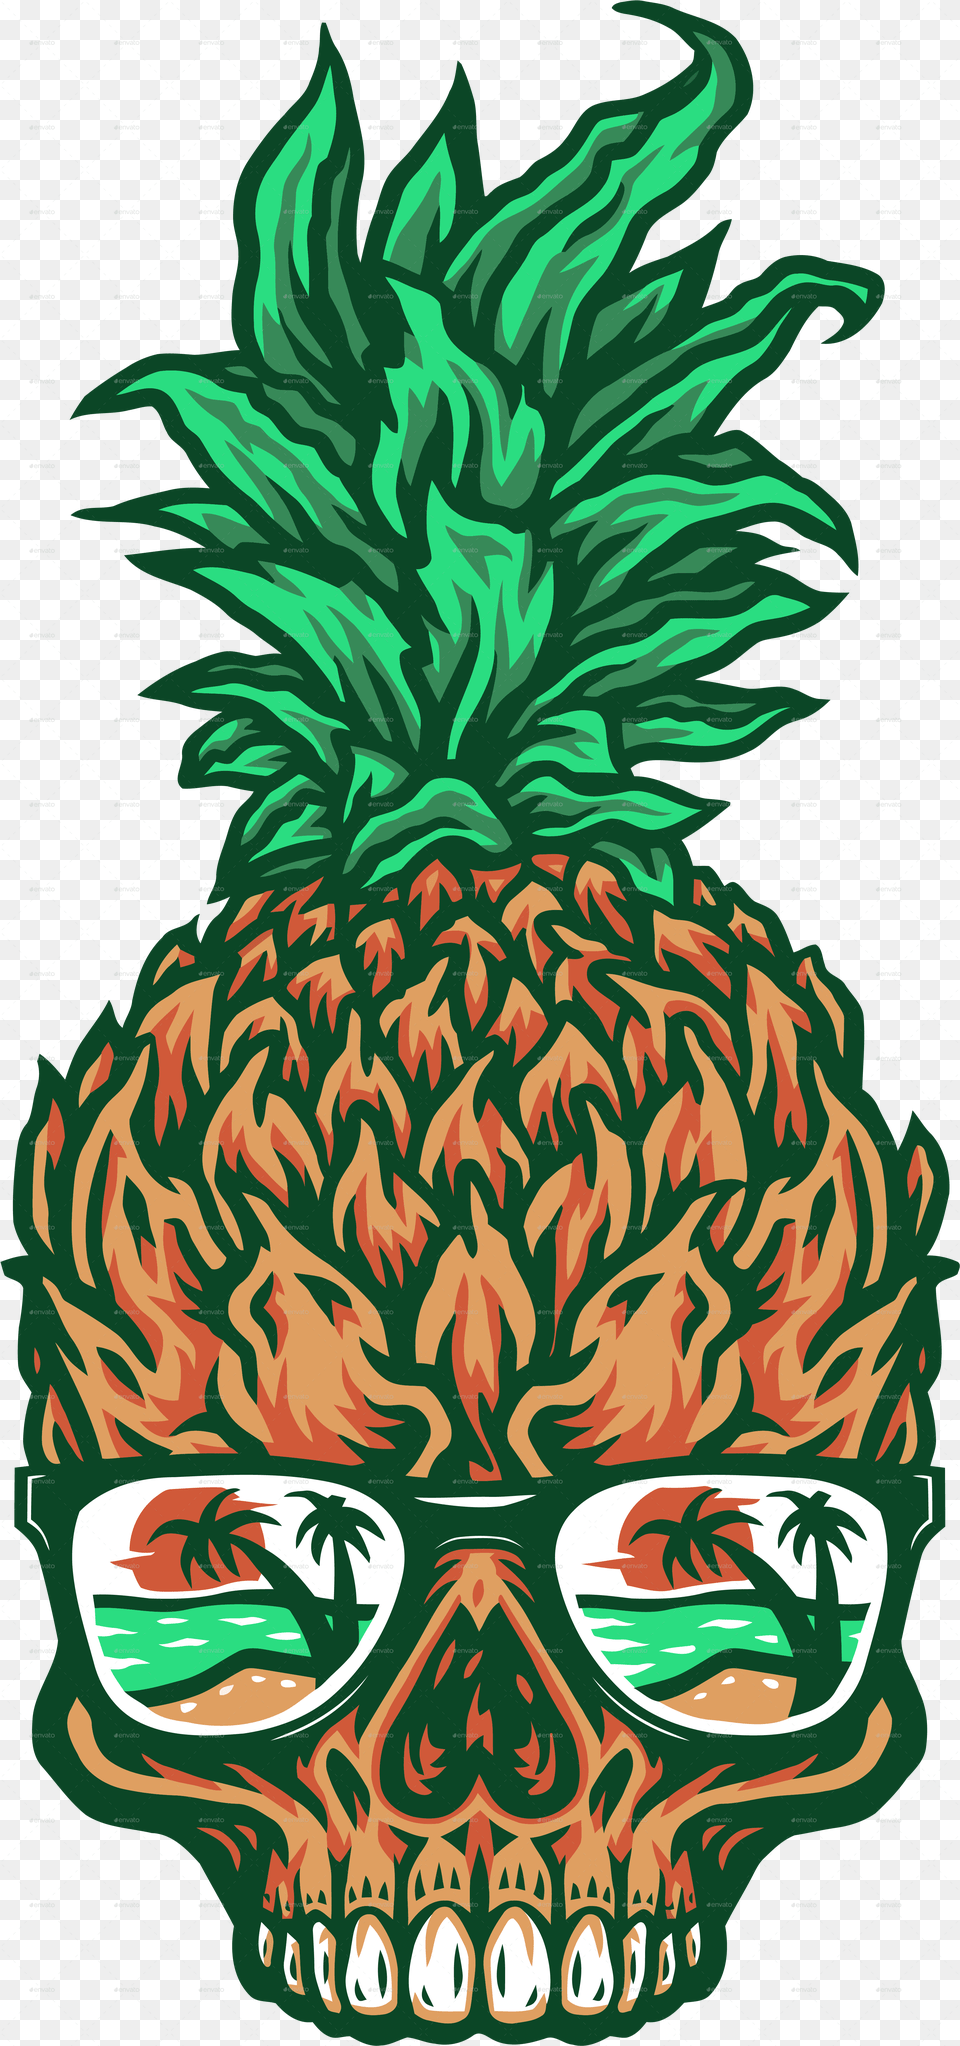 Pineapple Skull Pineapple Graphic, Food, Fruit, Plant, Produce Png Image